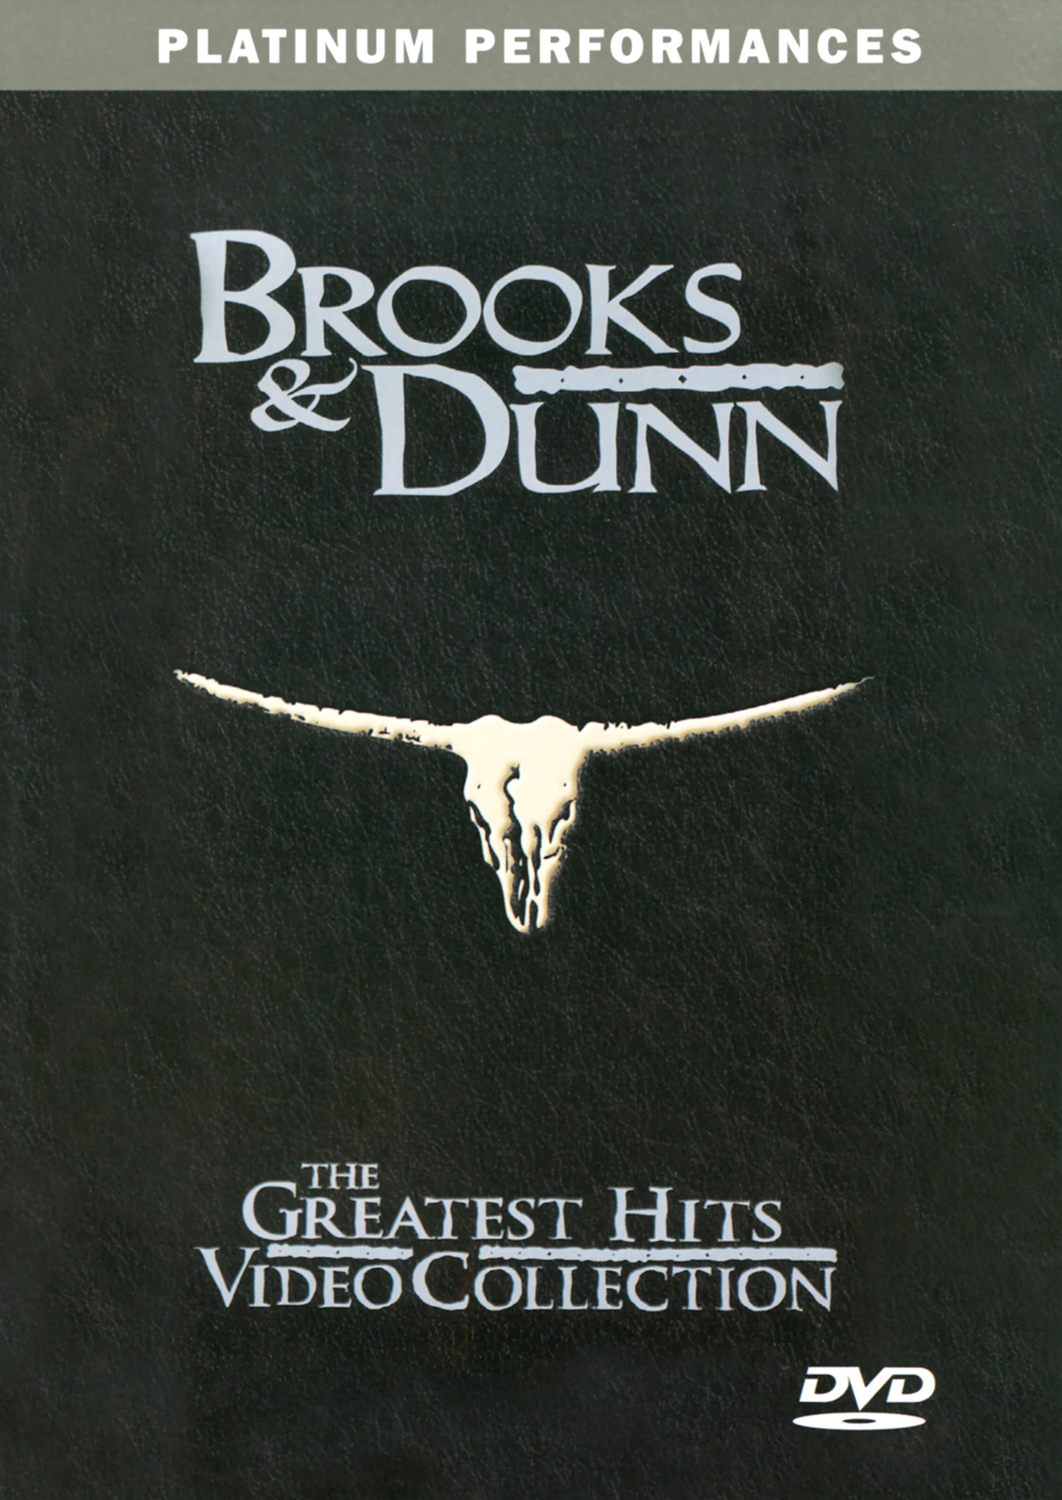 GREATEST HITS VIDEO COLLECTION-BROOKS & DUNN